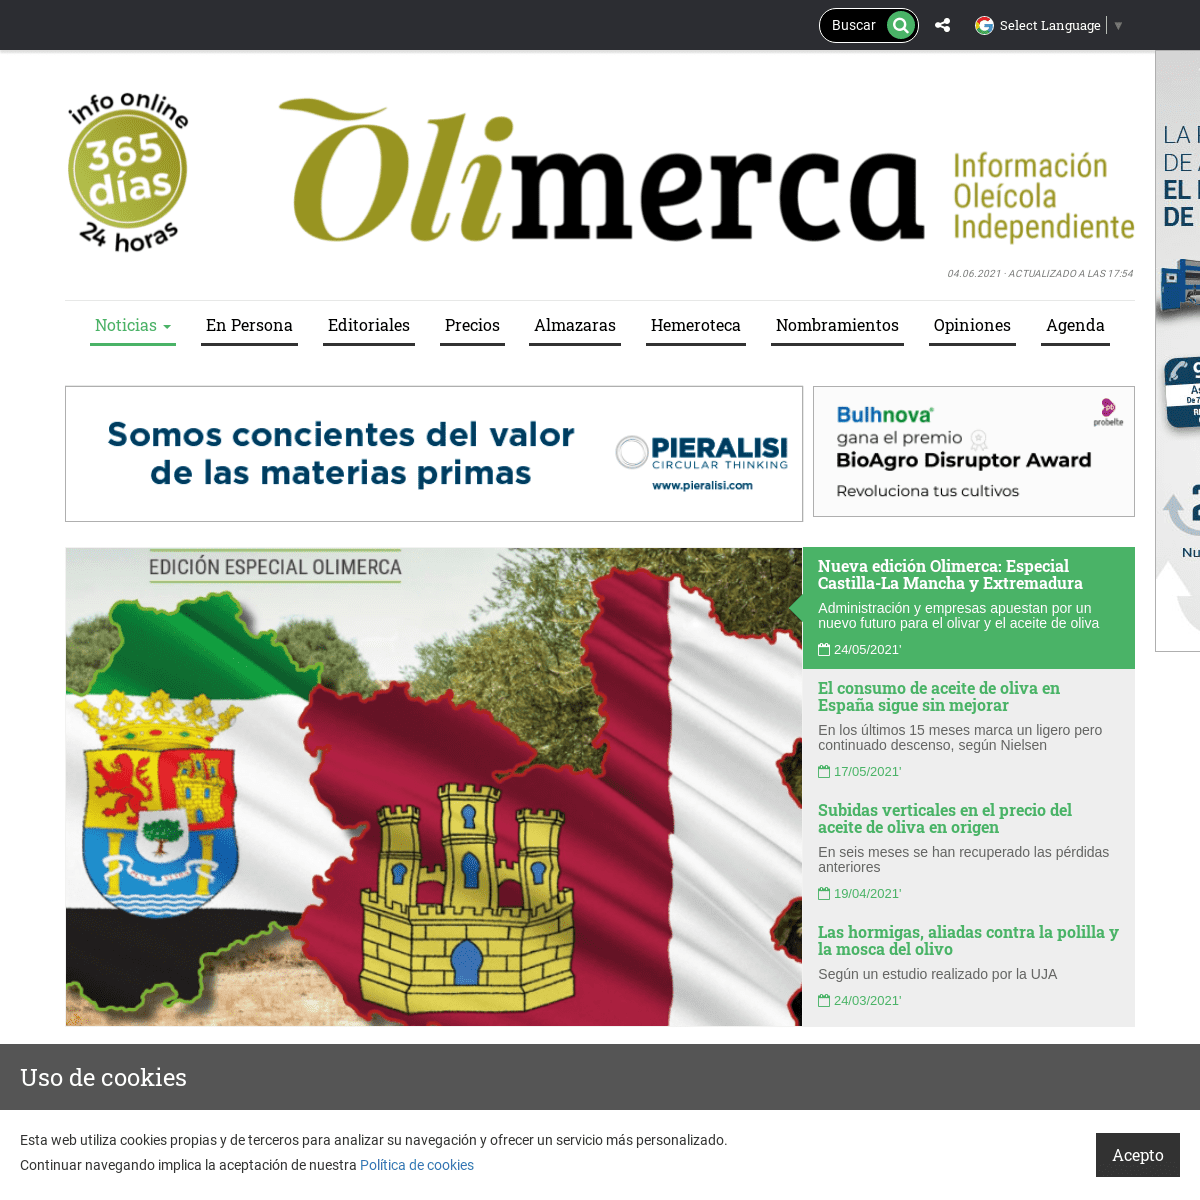 A complete backup of https://olimerca.com